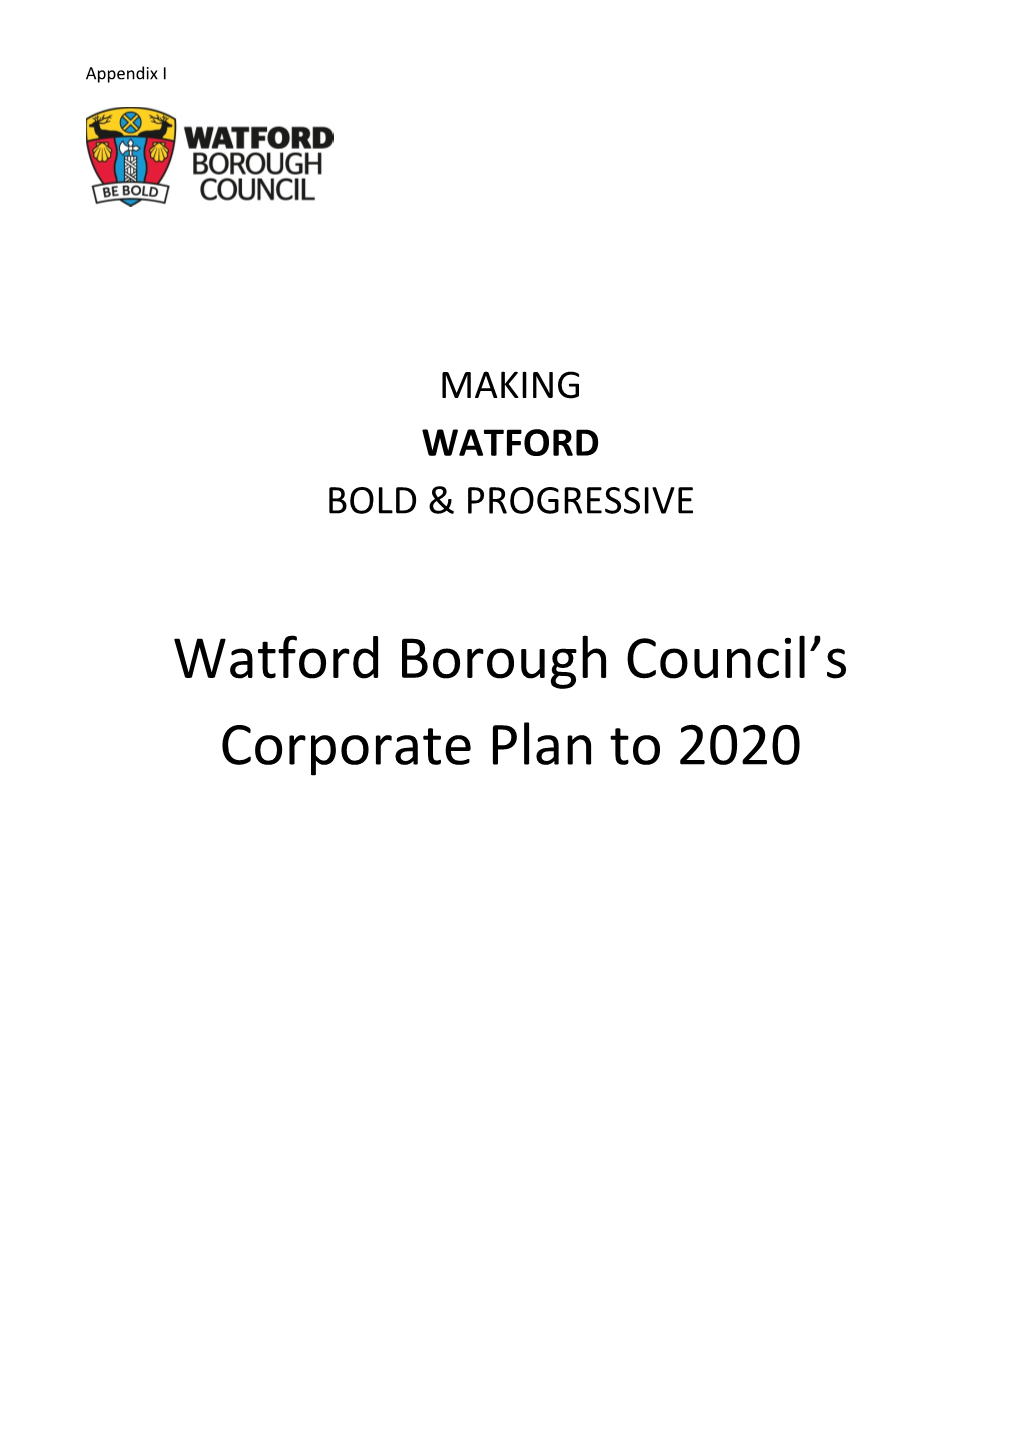 Watford Borough Council's Corporate Plan to 2020